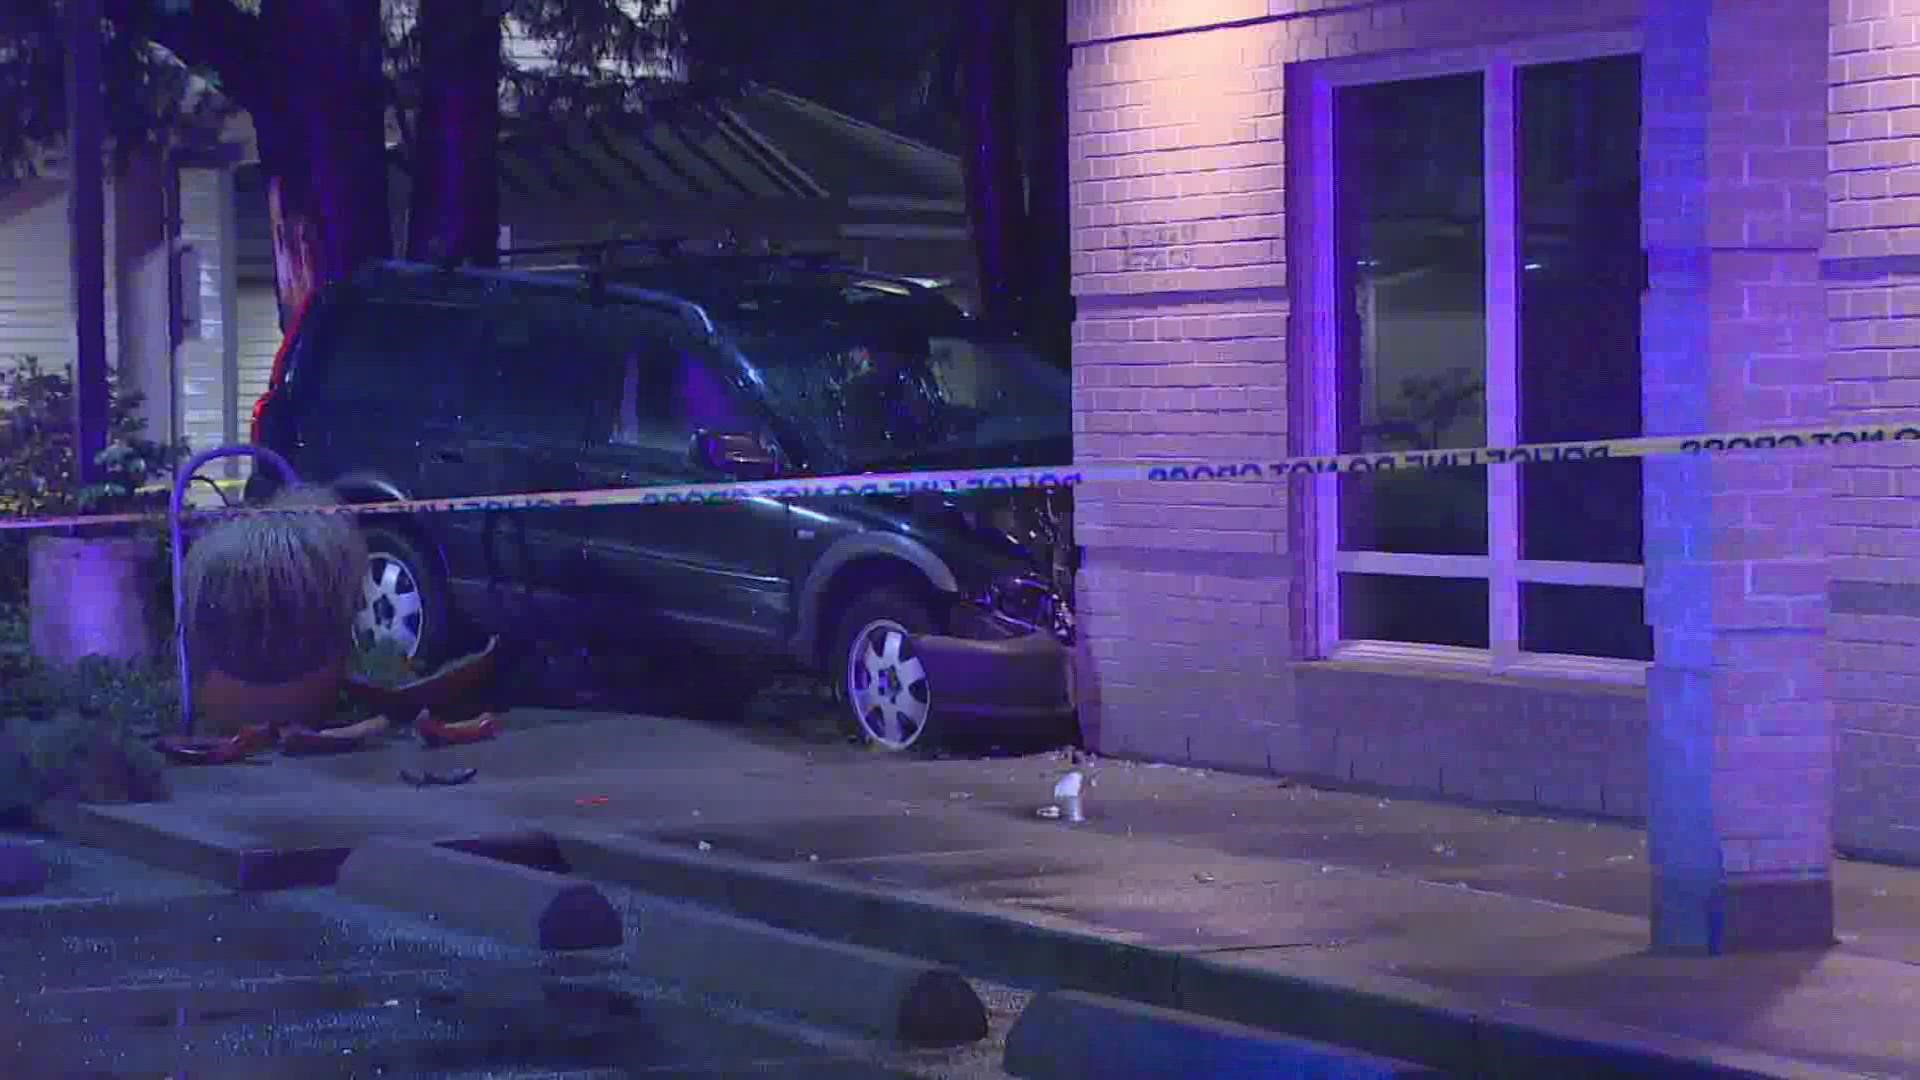 A driver hit and killed a 58-year-old man in Federal Way before crashing their car into a building and then escaping on foot